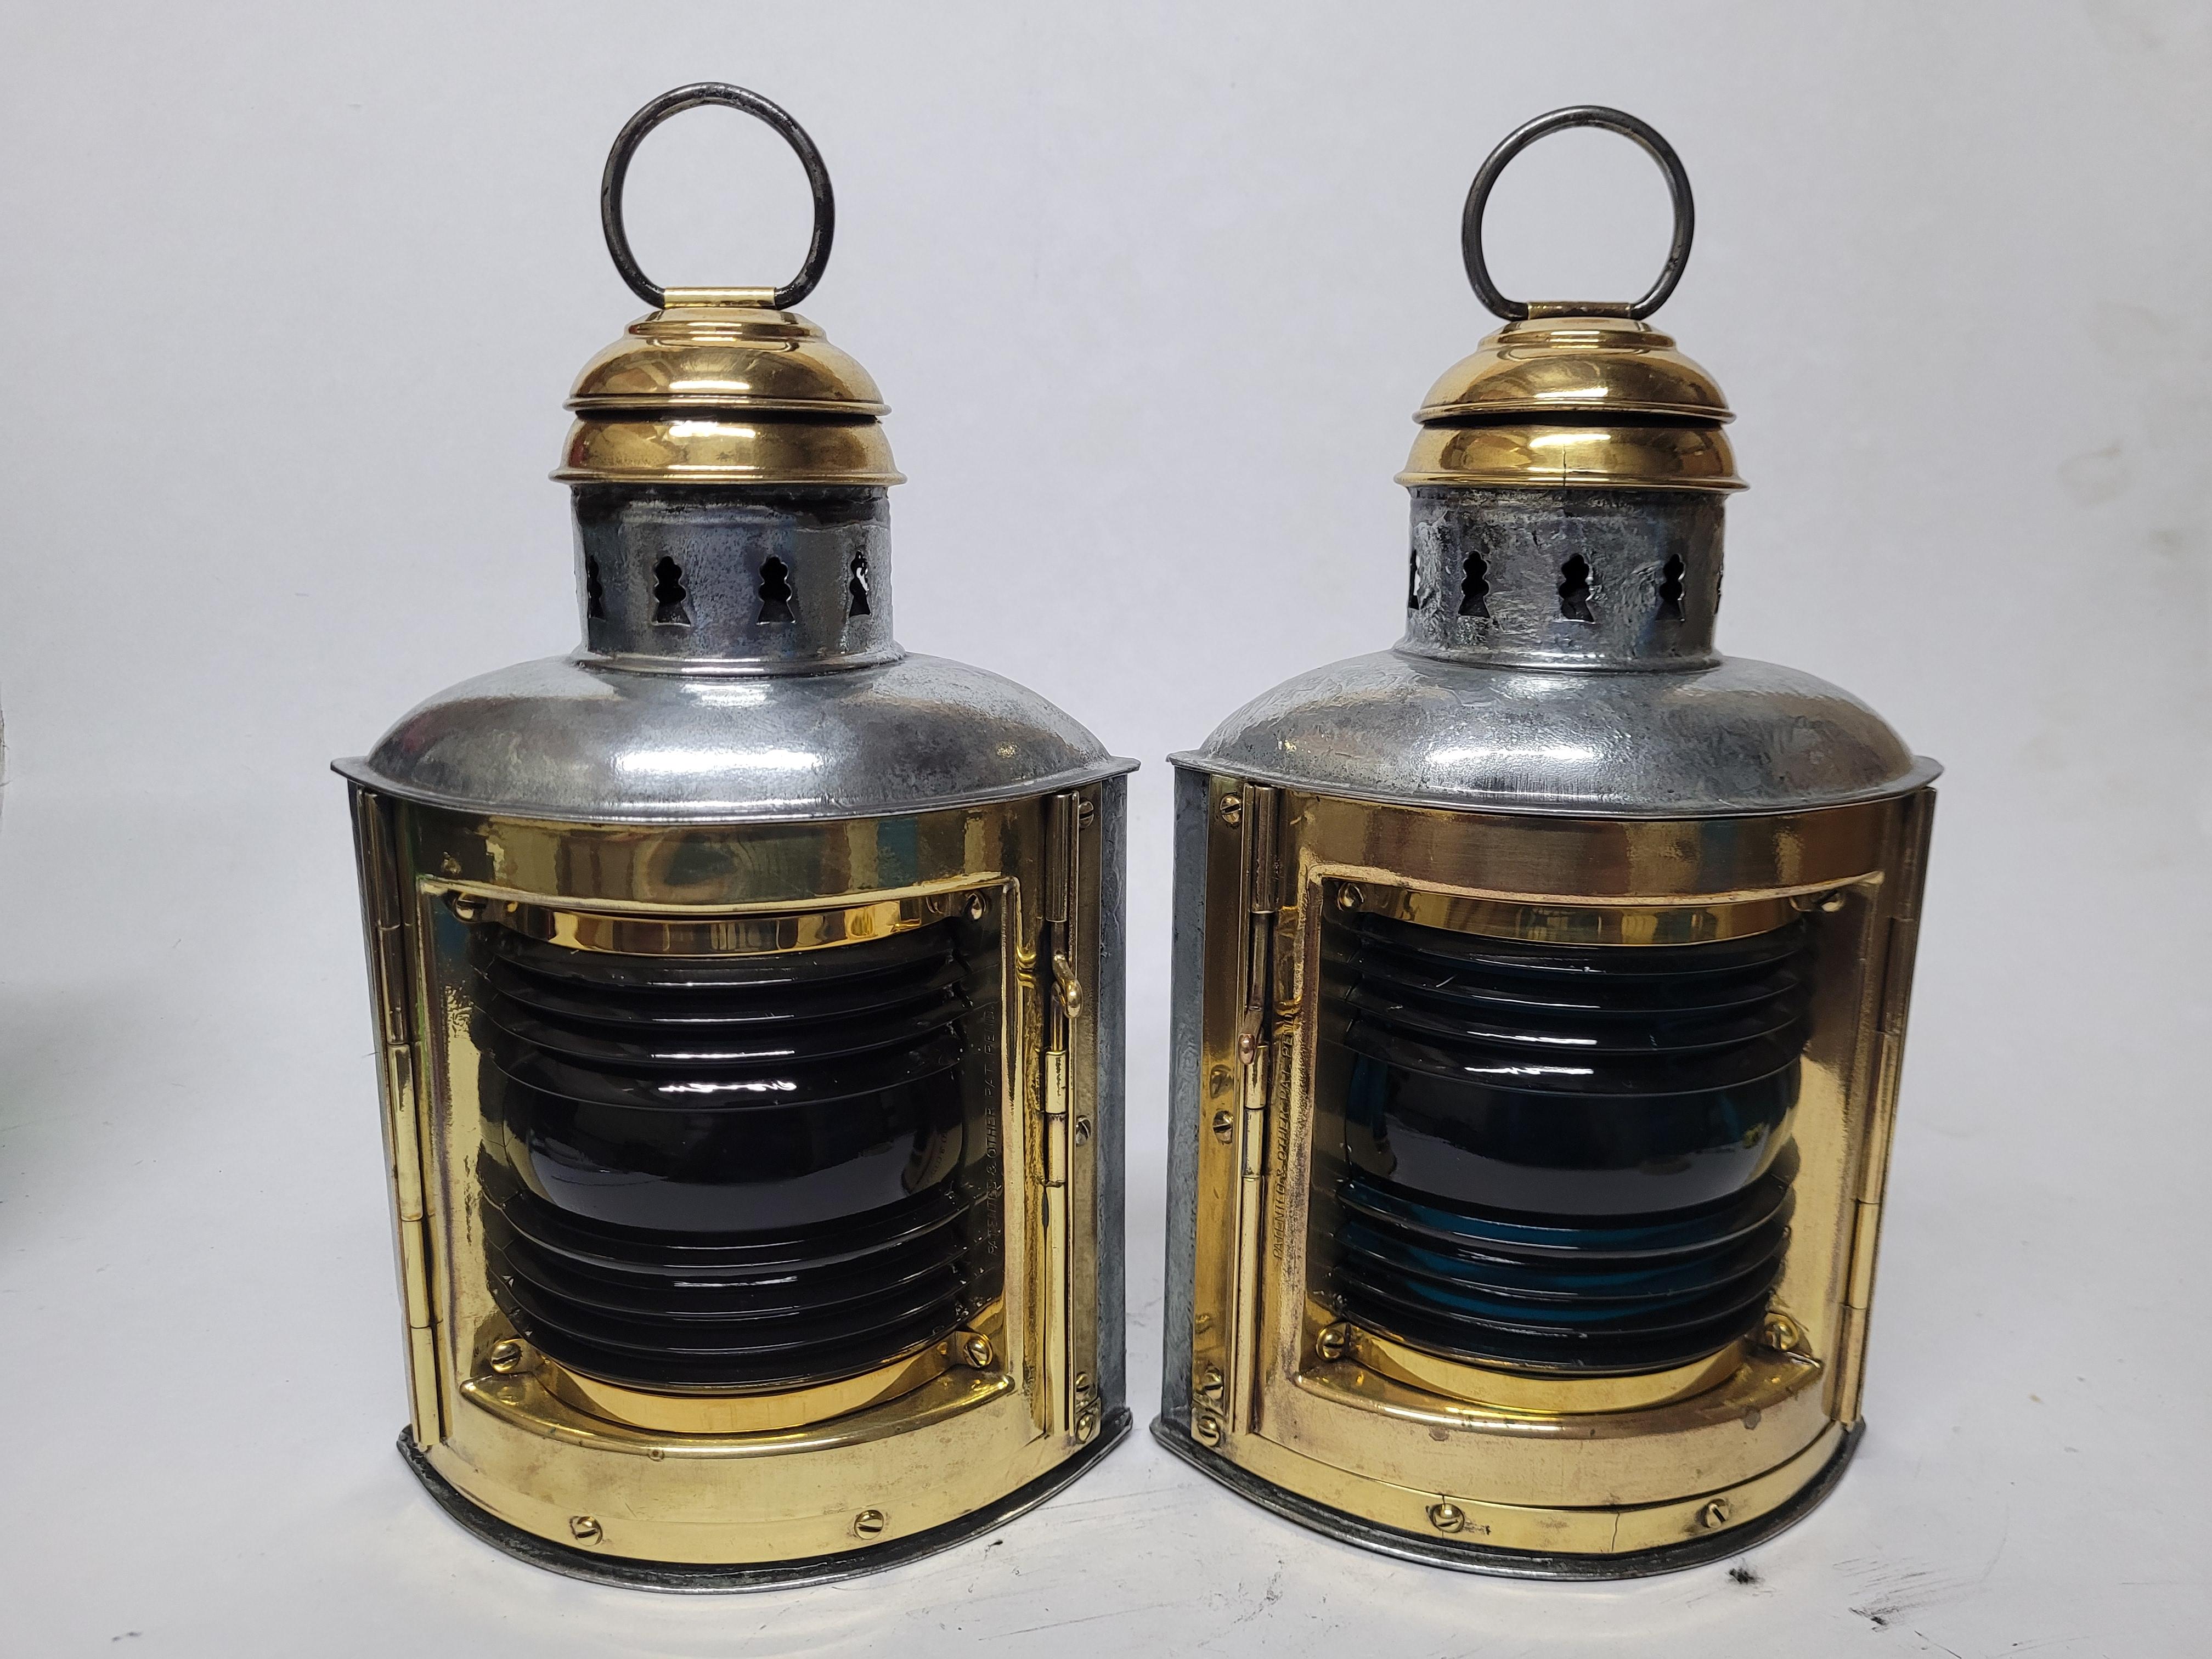 Polished steel port and starboard boat lanterns with blue and red fresnel lenses. The lenses are fitted to polished and lacquered brass frames. With makers badge from Perko. American Circa 1955.

Weight: 2.55 lbs.
Overall Dimensions: 11